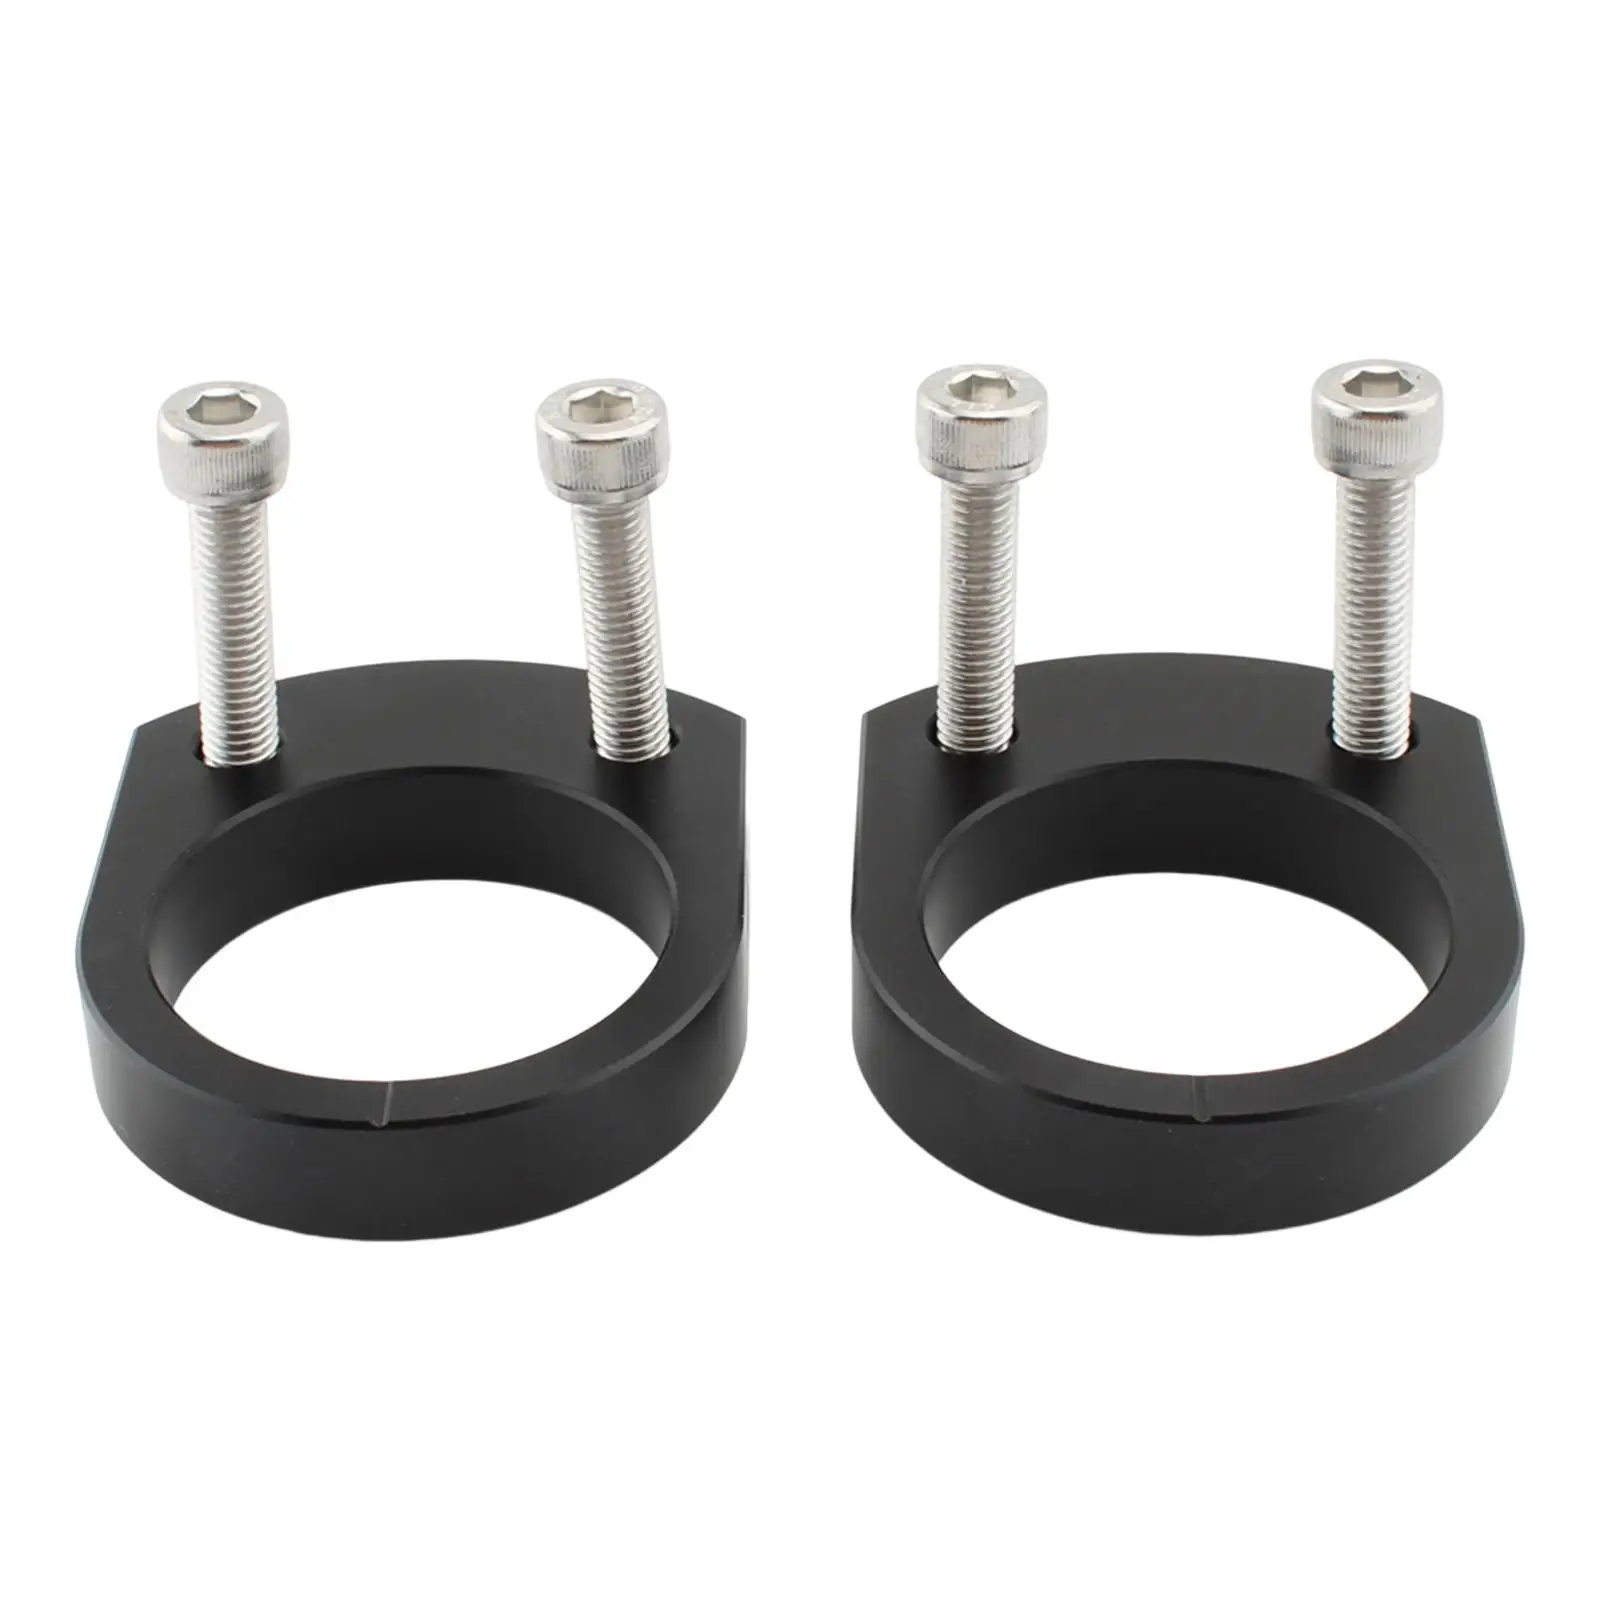 2Pcs Motorcycle Handlebar Risers 14mm Heightened Handle Bar Riser Clamp for